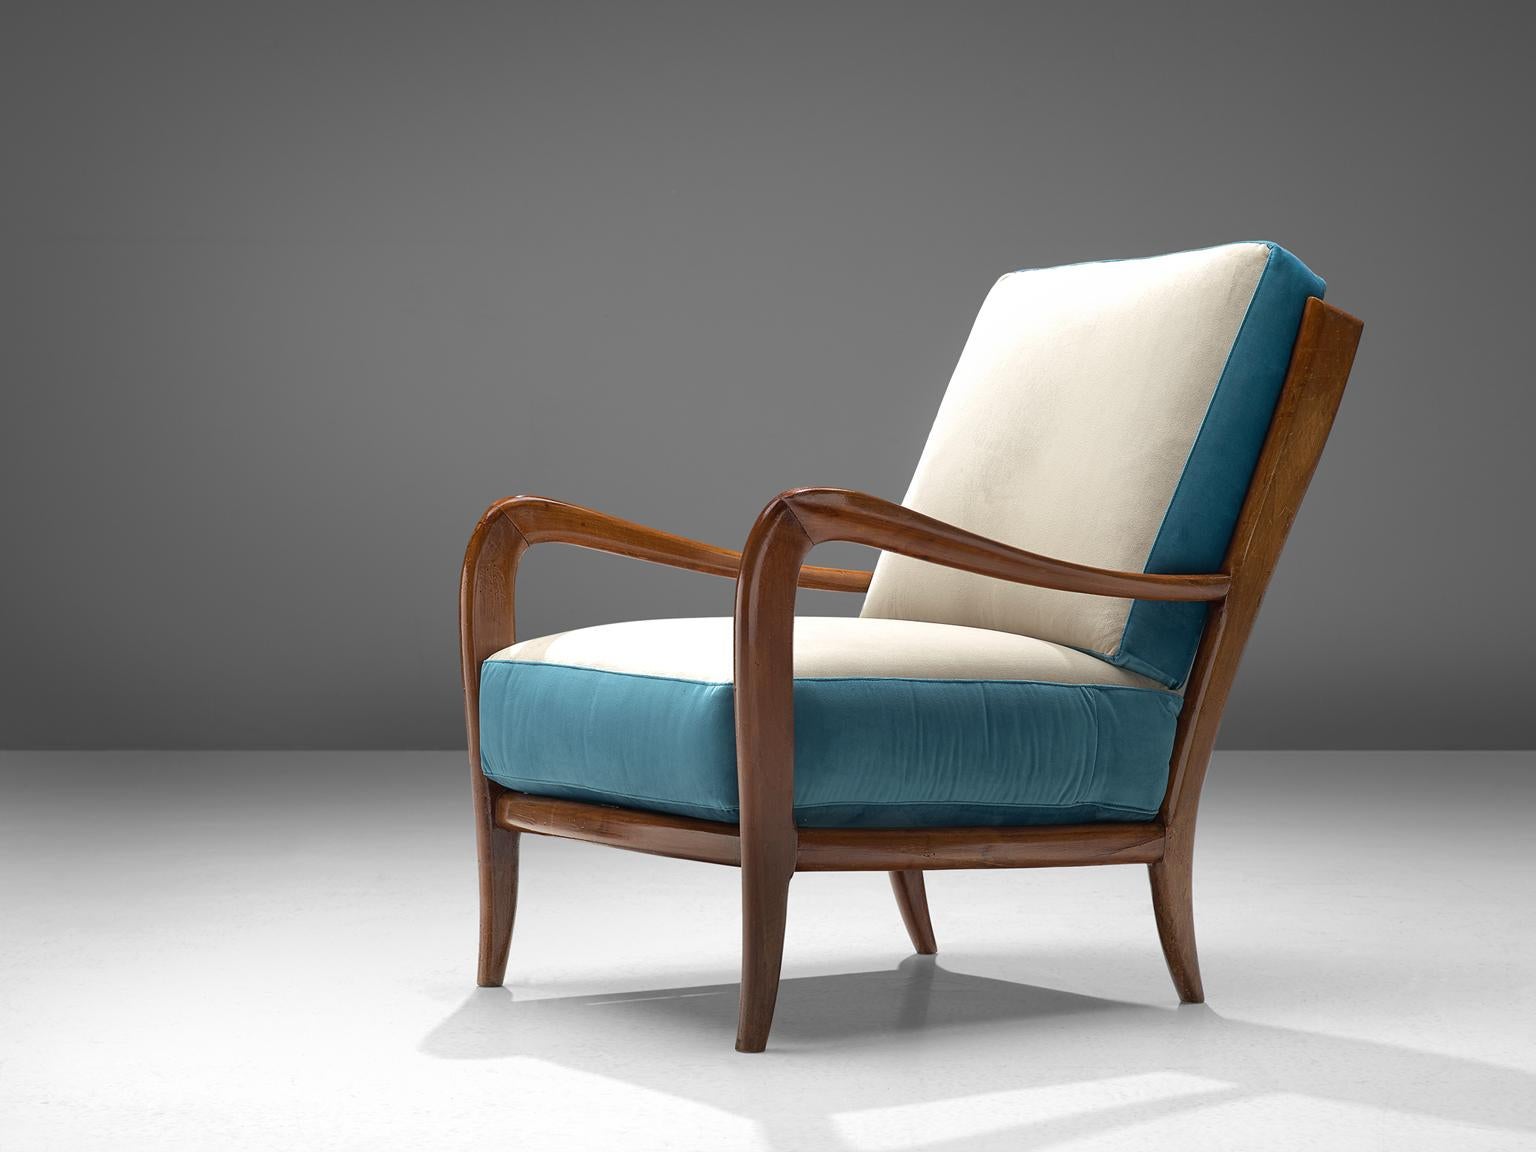 Armchair, Italian walnut and fabric, 1960s, Italy.

This poetic armchair is made in the style of Paolo Buffa (1903-1970). The chairs are luxurious in their look and feel and thanks to their slightly tilted back, extremely comfortable. The grains in